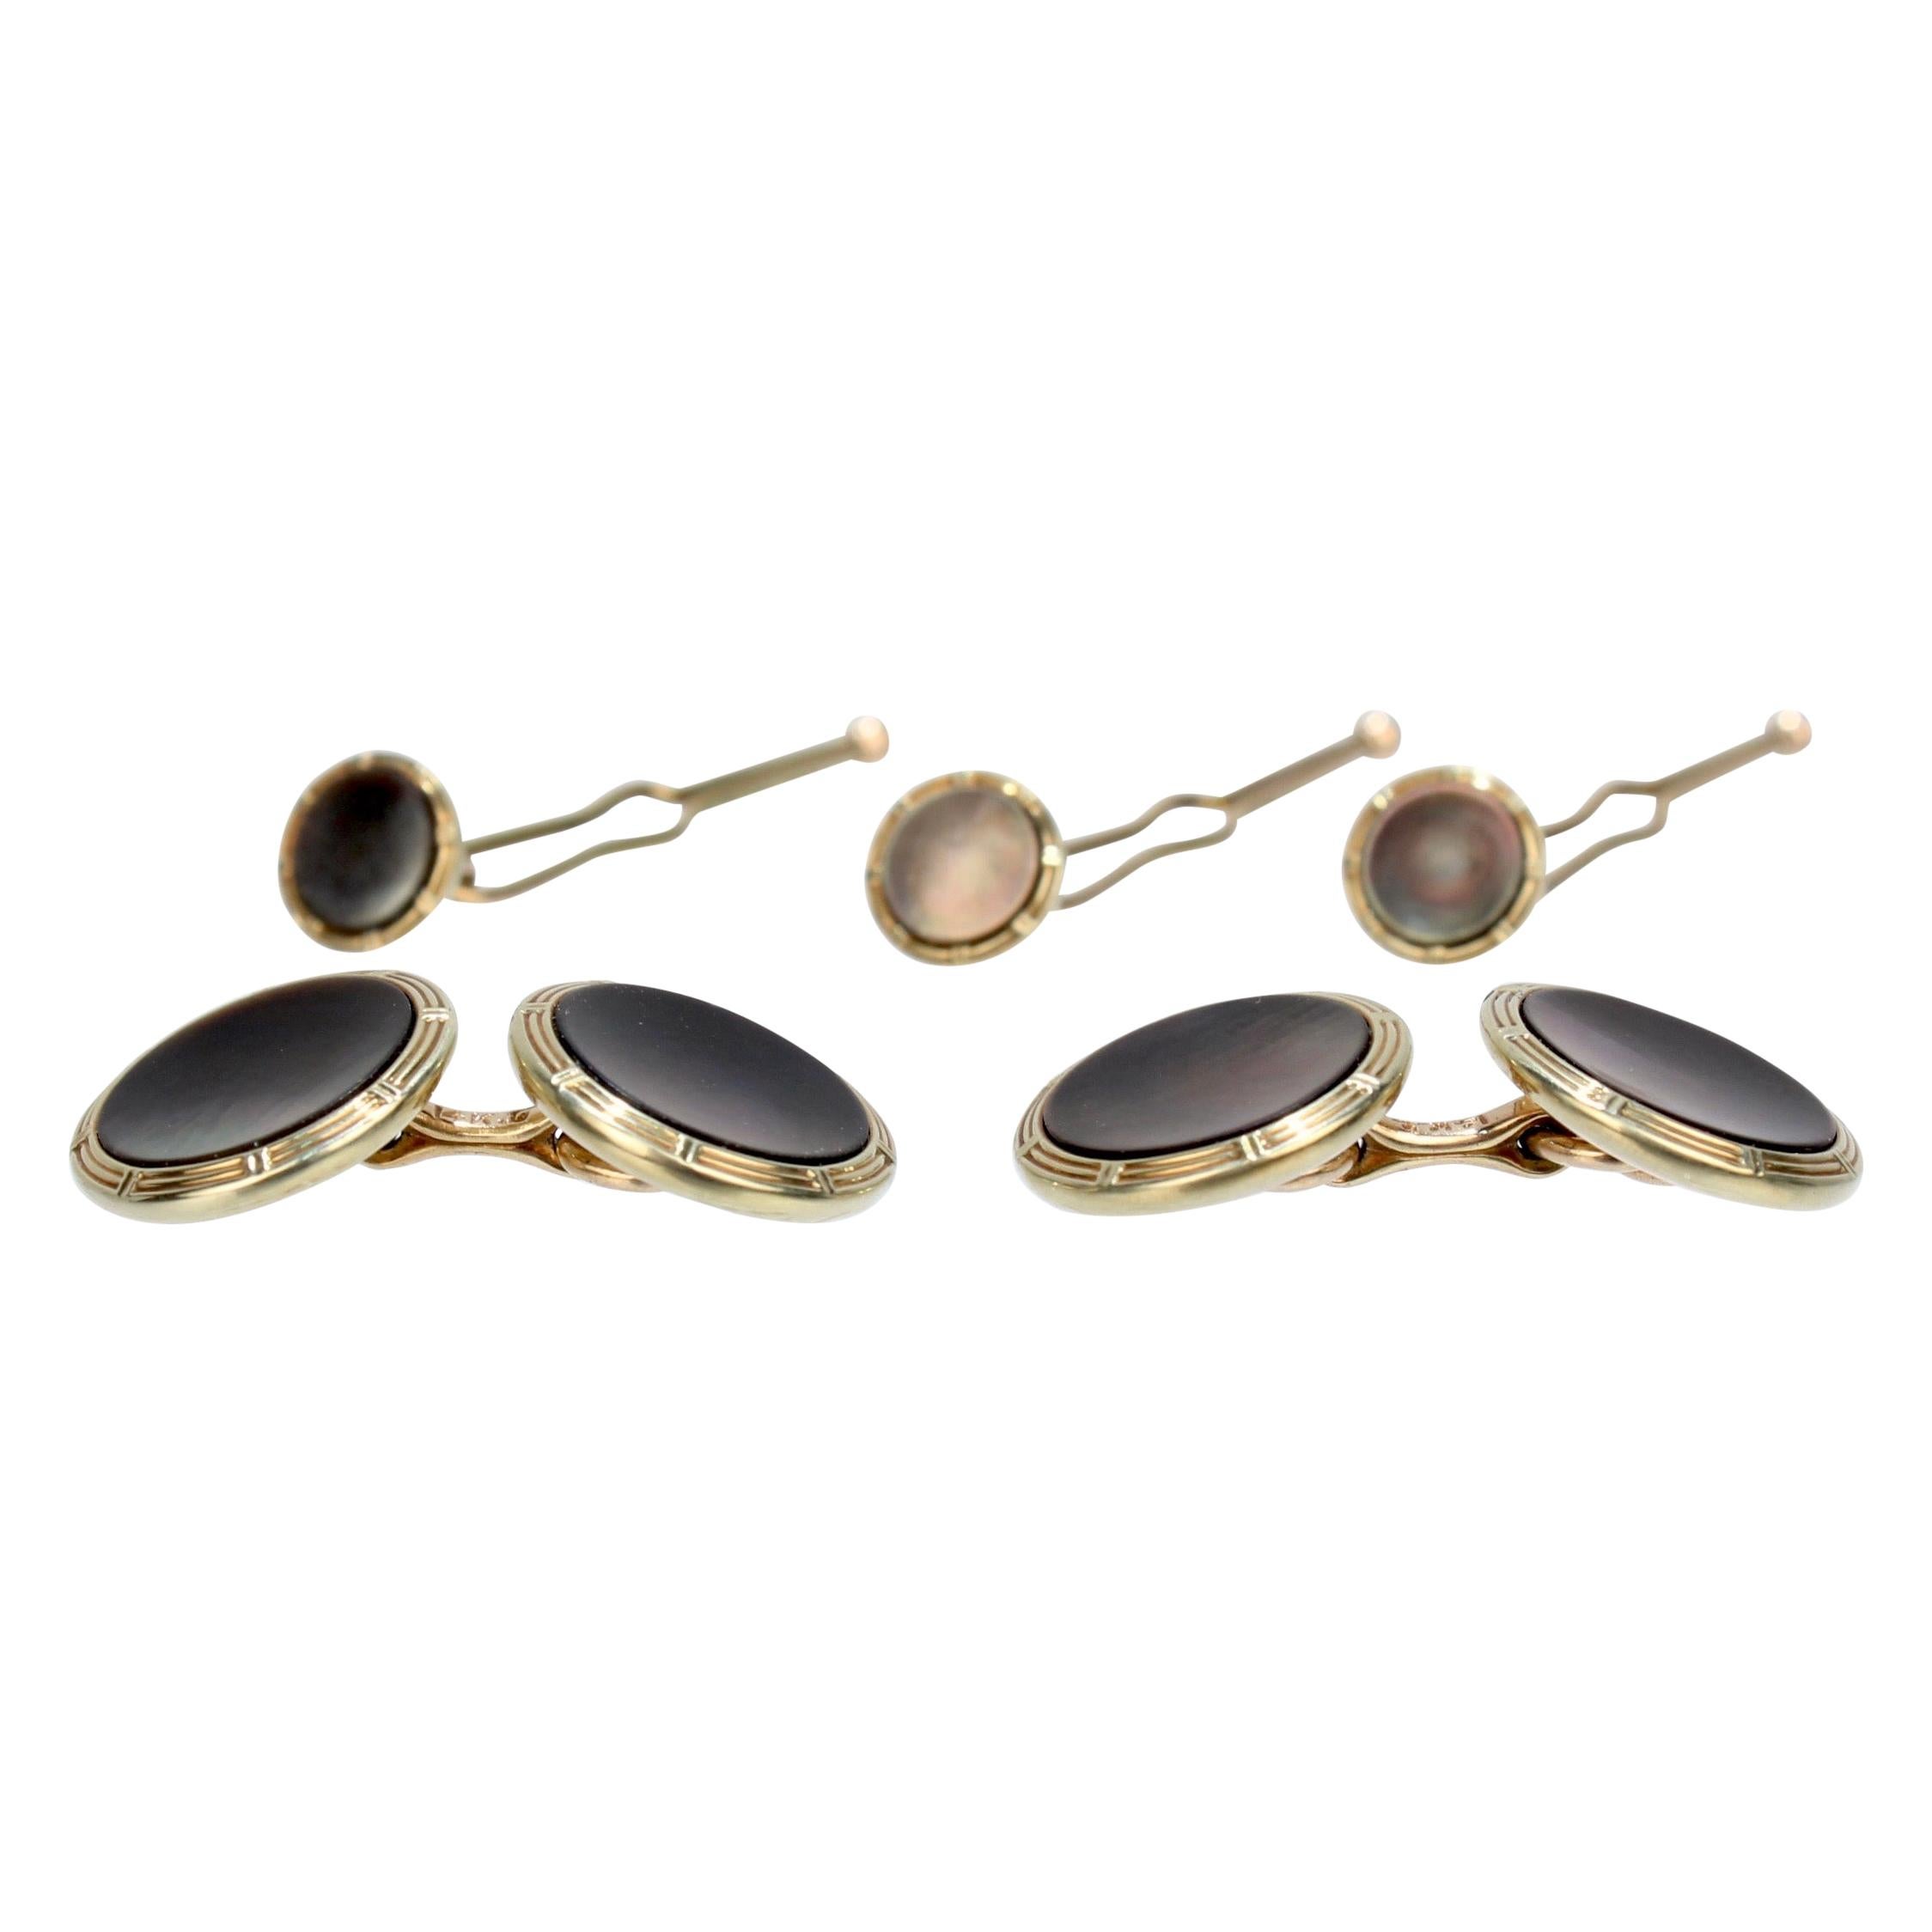 Krementz 14 Karat Gold and Mother of Pearl Cufflinks and Button Dress Set For Sale